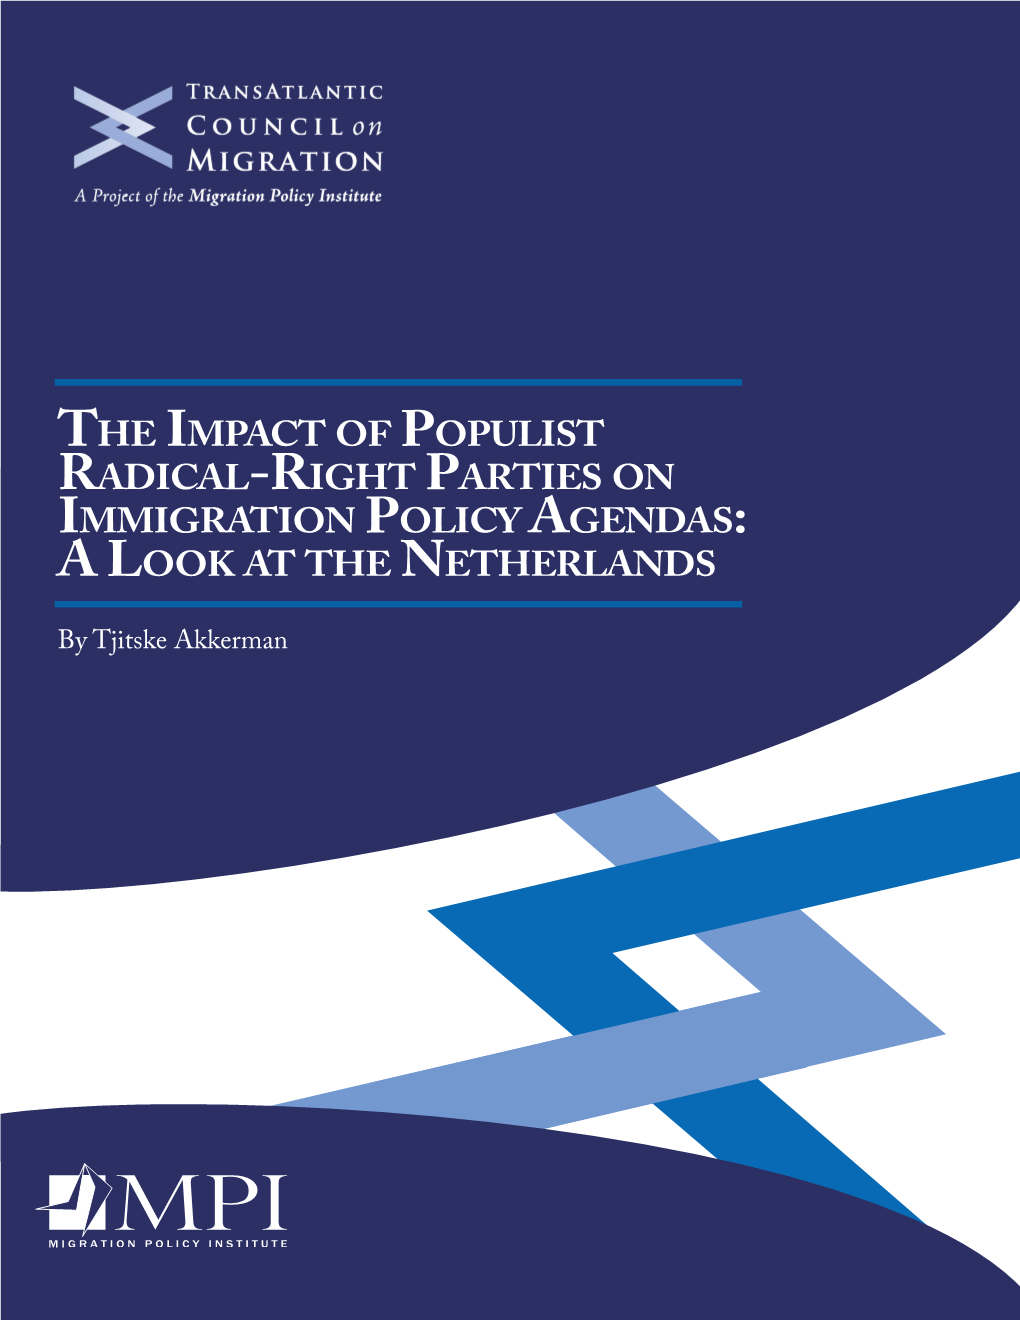 The Impact of Populist Radical-Right Parties on Immigration Policy Agendas: a Look at the Netherlands